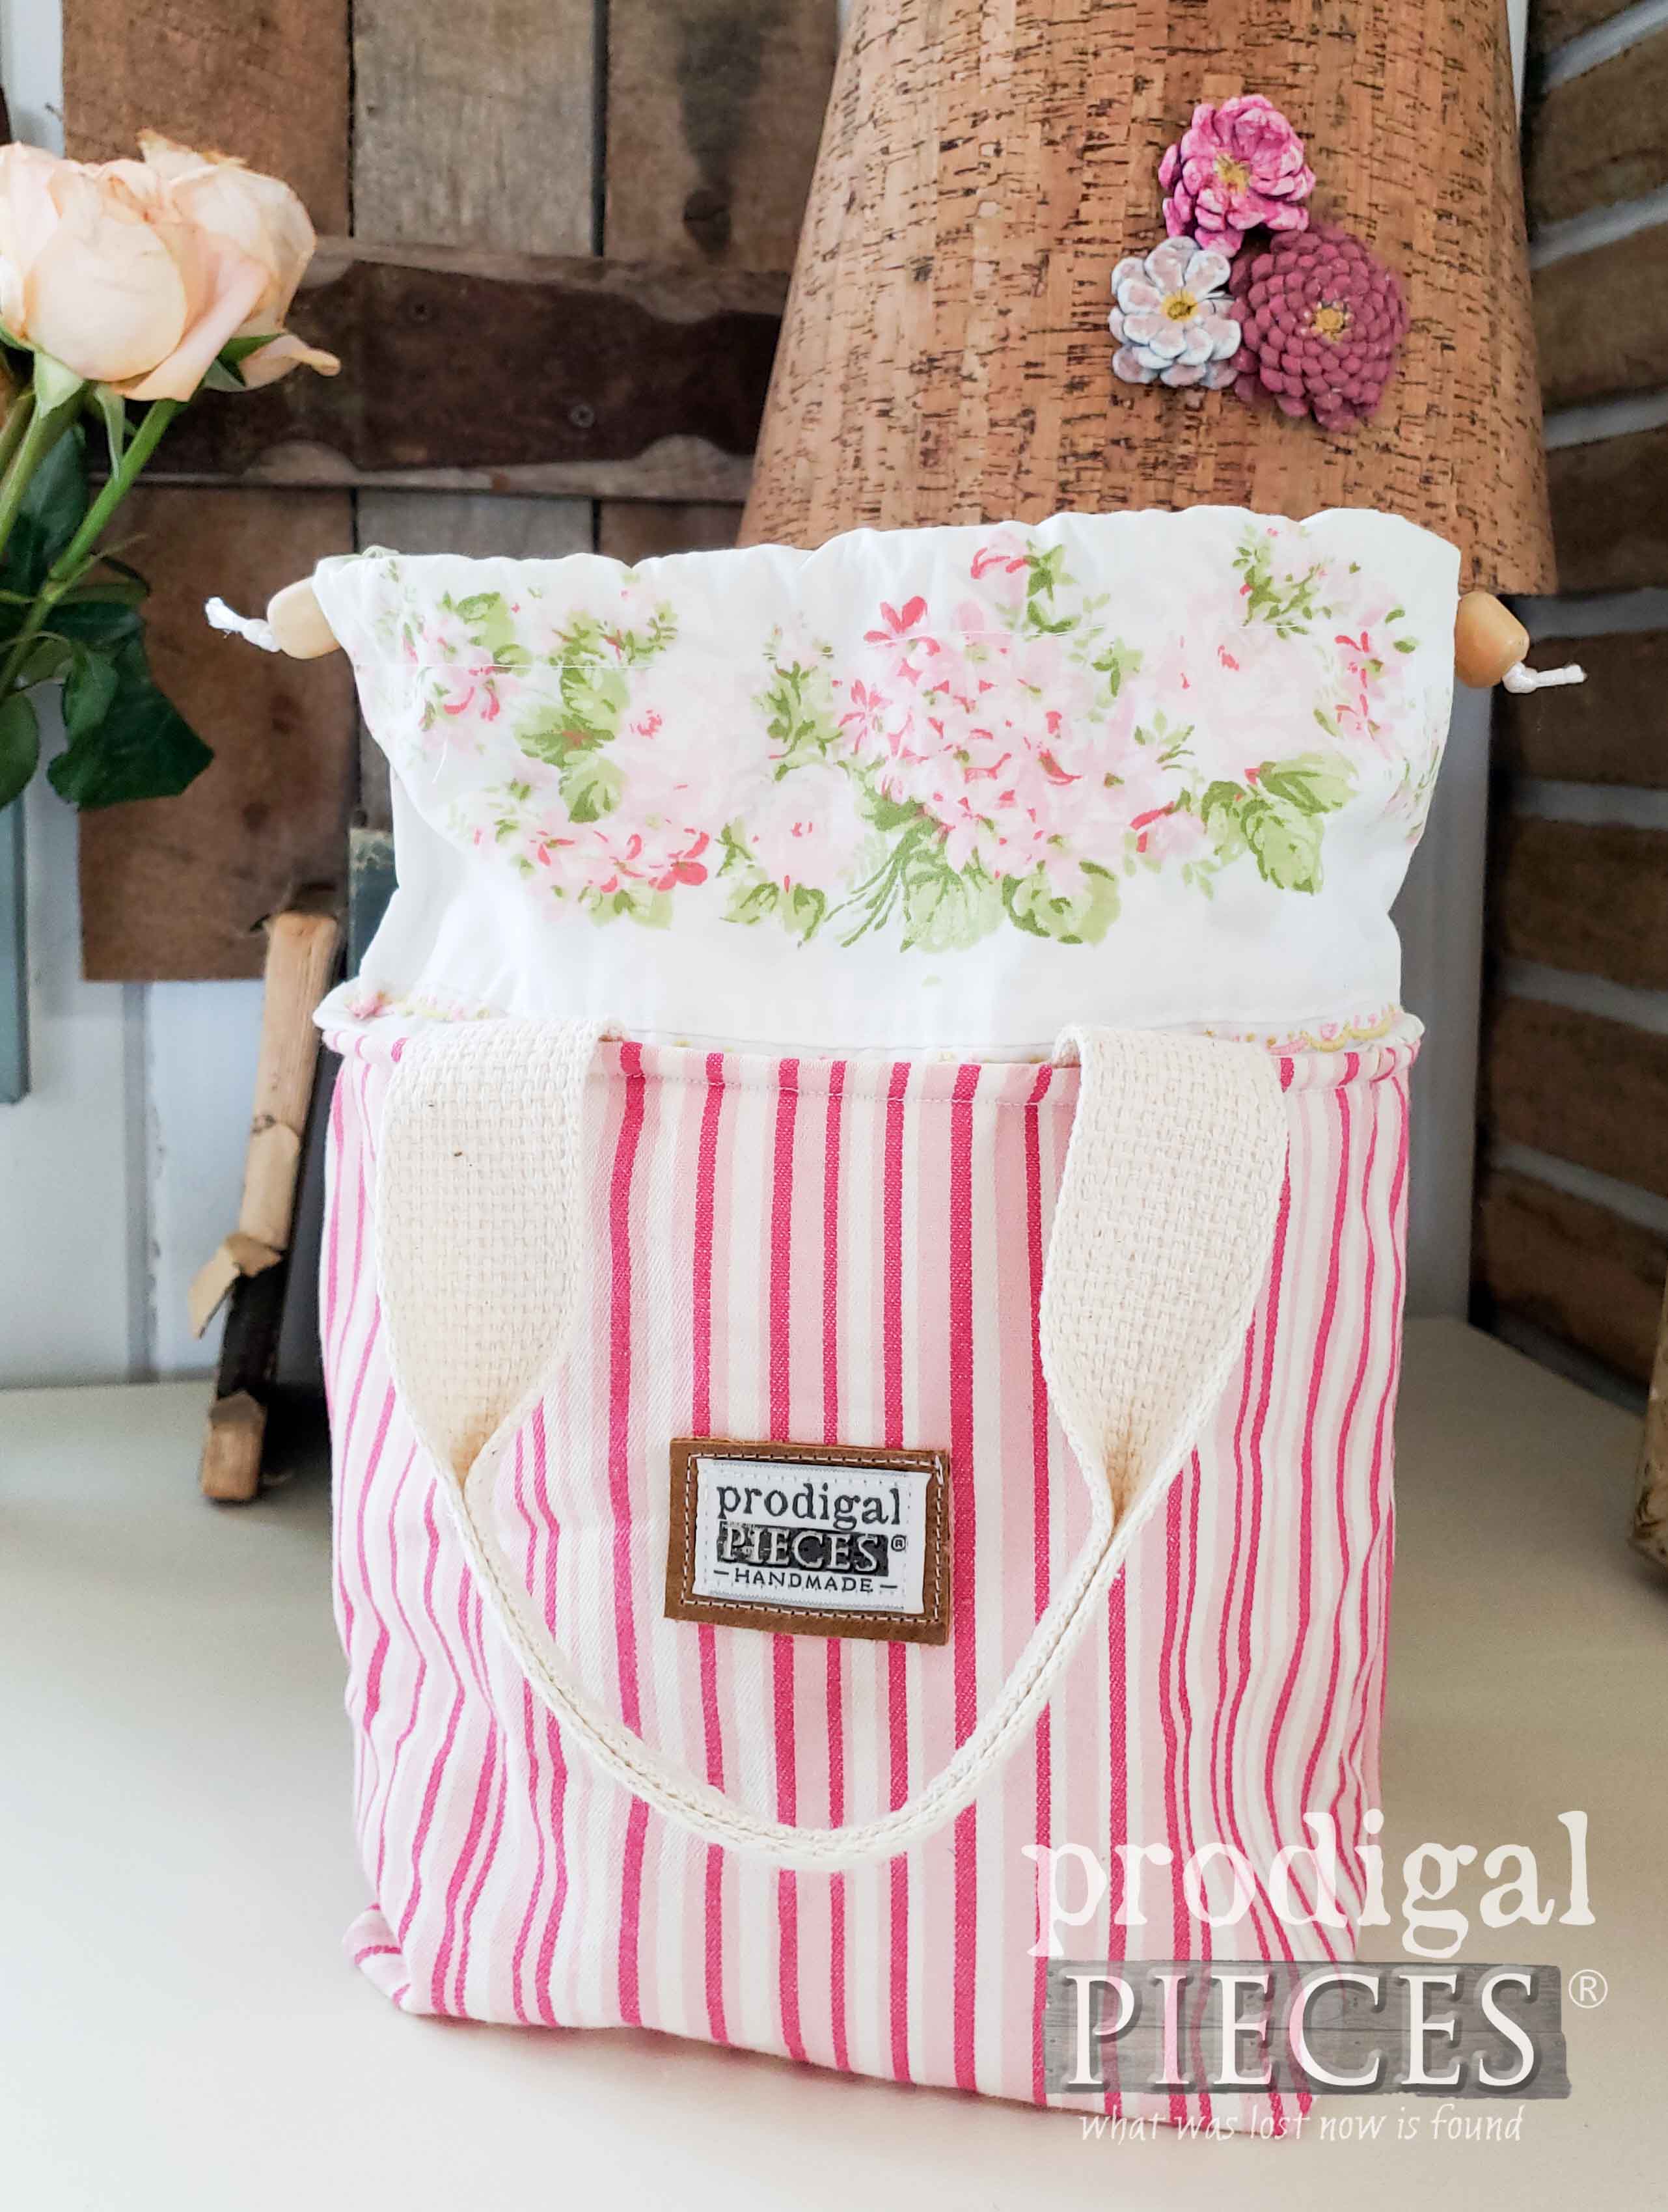 Pink Rose with Stripe Insulated Lunch Bag Tote by Larissa of Prodigal Pieces | Purchase yours at shop.prodigalpieces.com #prodigalpieces #fashion #accessories #handmade #shopping